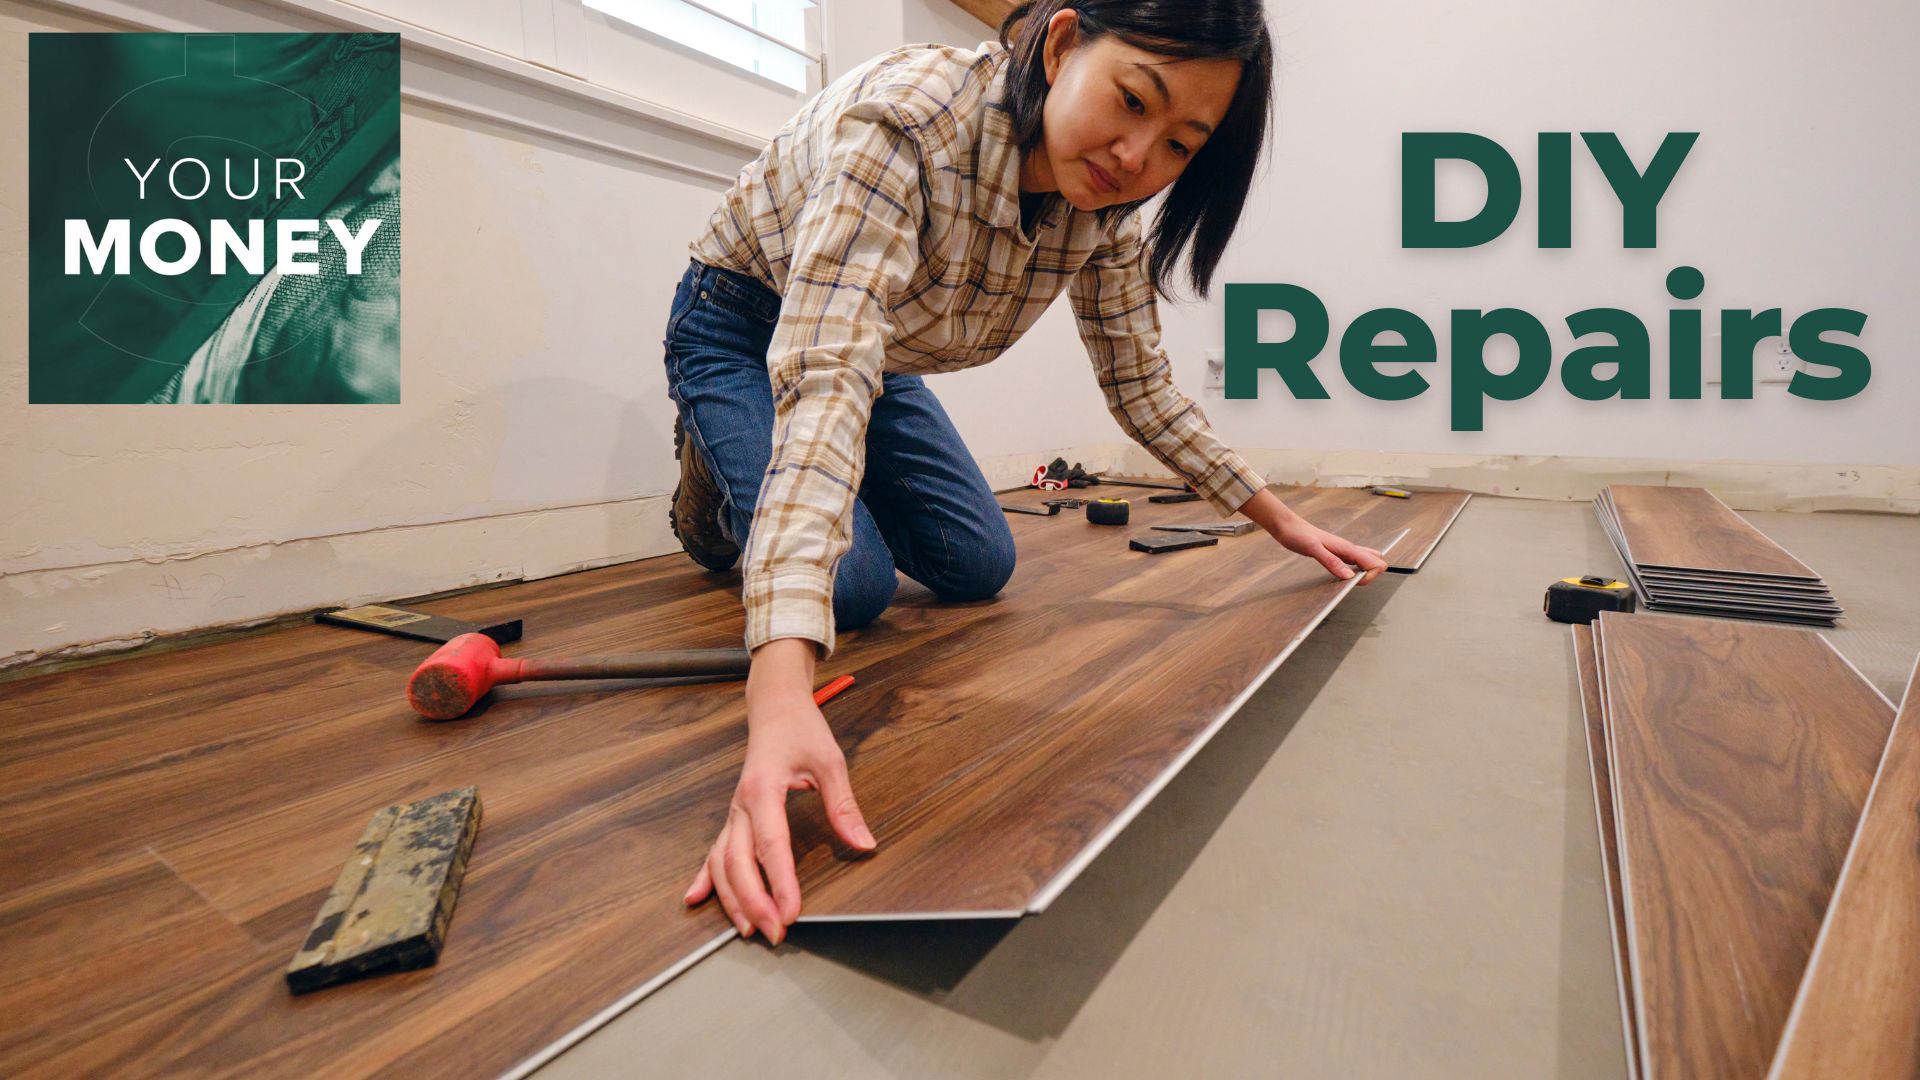 Gordon Severson shares how you can tackle do-it-yourself home repairs and ways you can save. Plus what you need to know about the Right to Repair movement.